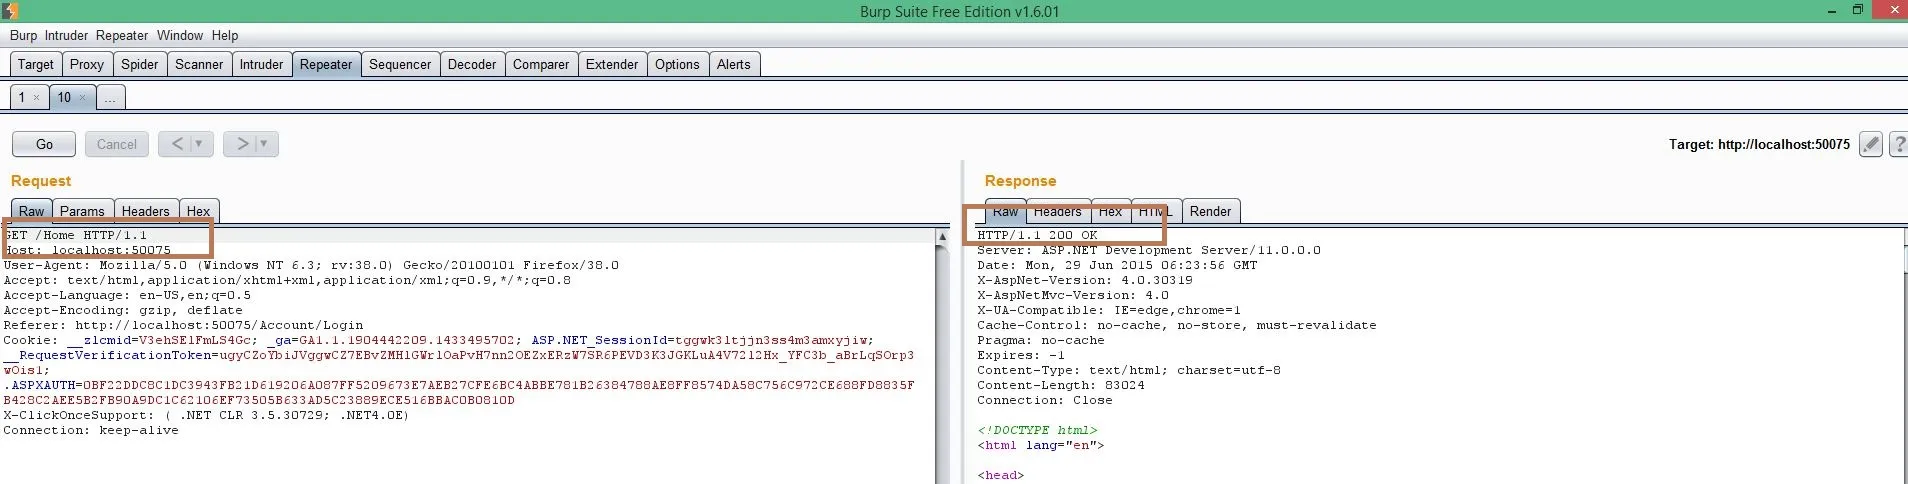 Below is the screen shot of burp tool to send authenticated request which gives success response